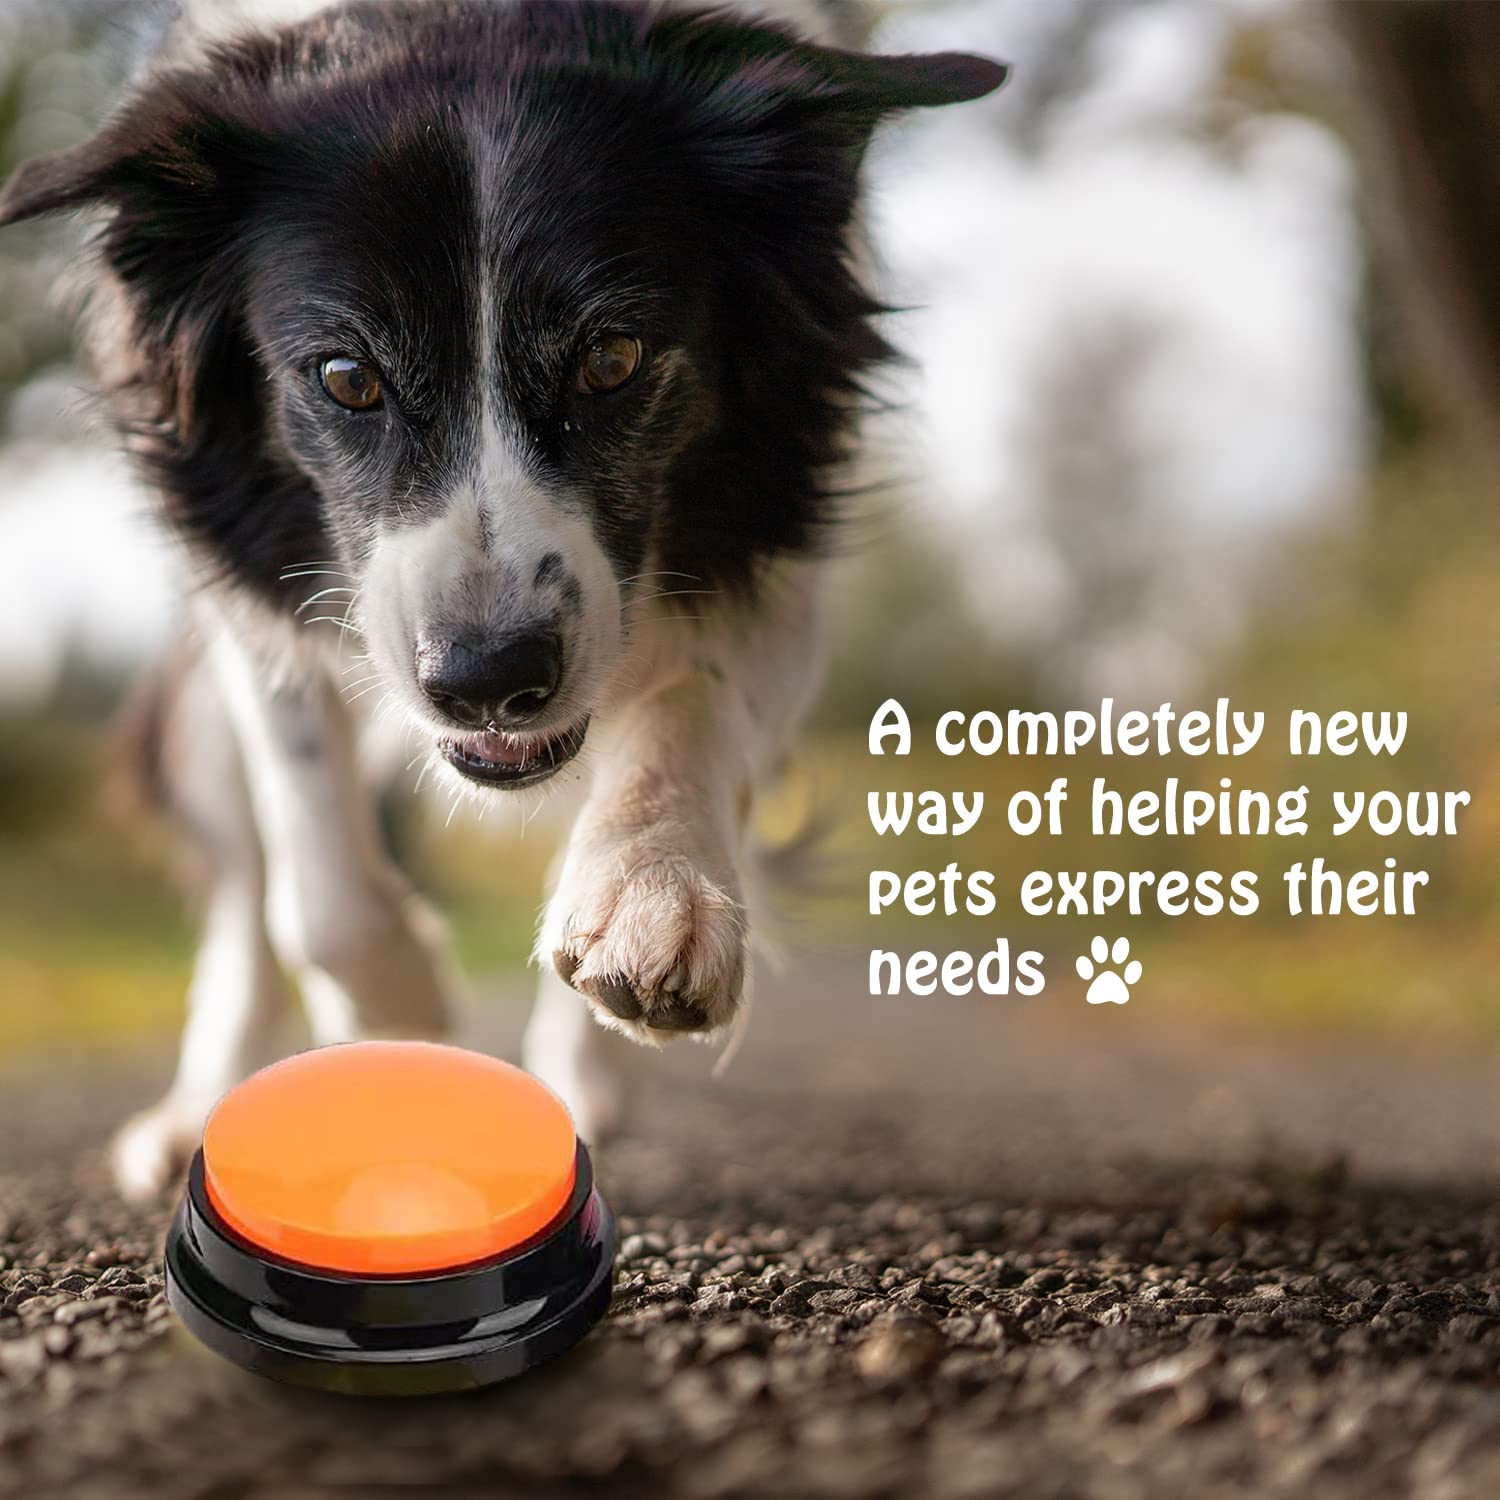 Funny Play Toy Interactive Mini Voice 30 Second Recordeable Button For Pet Training